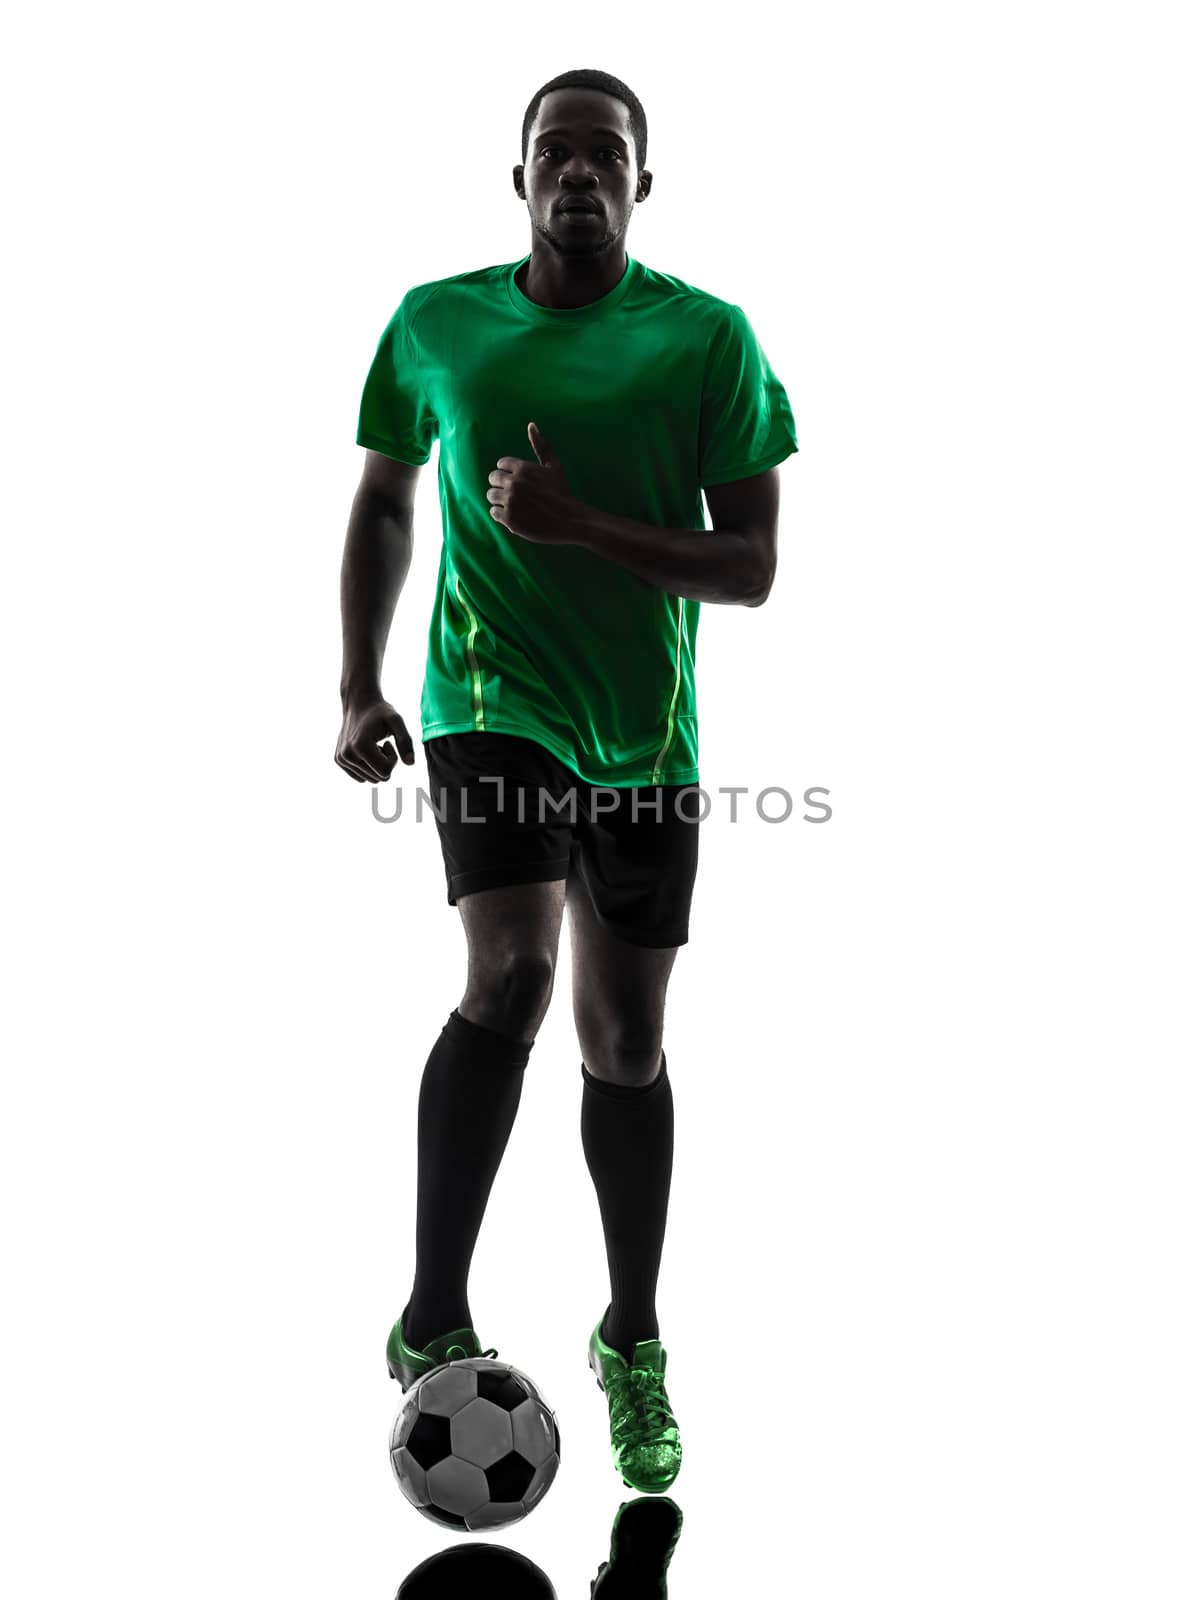 one african man soccer player green jersey running with football  in silhouette  on white background